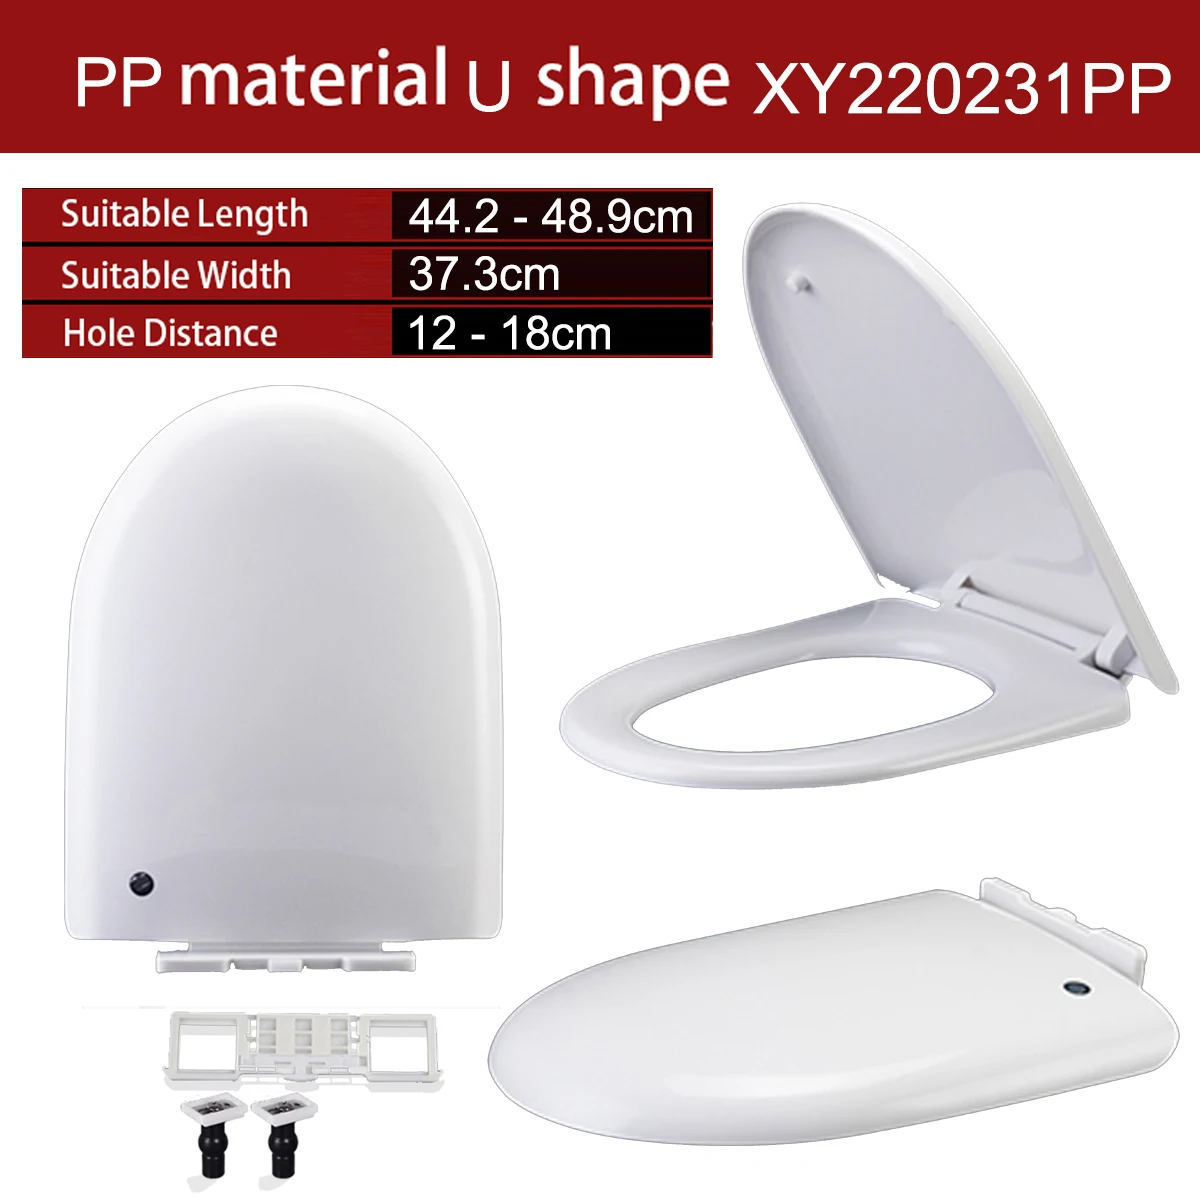 

Universal U Shape Elongated Slow Close WC Toilet Seats Cover Bowl Lid Top Mounted Quick Release PP Board Soft Closure XY22031PP